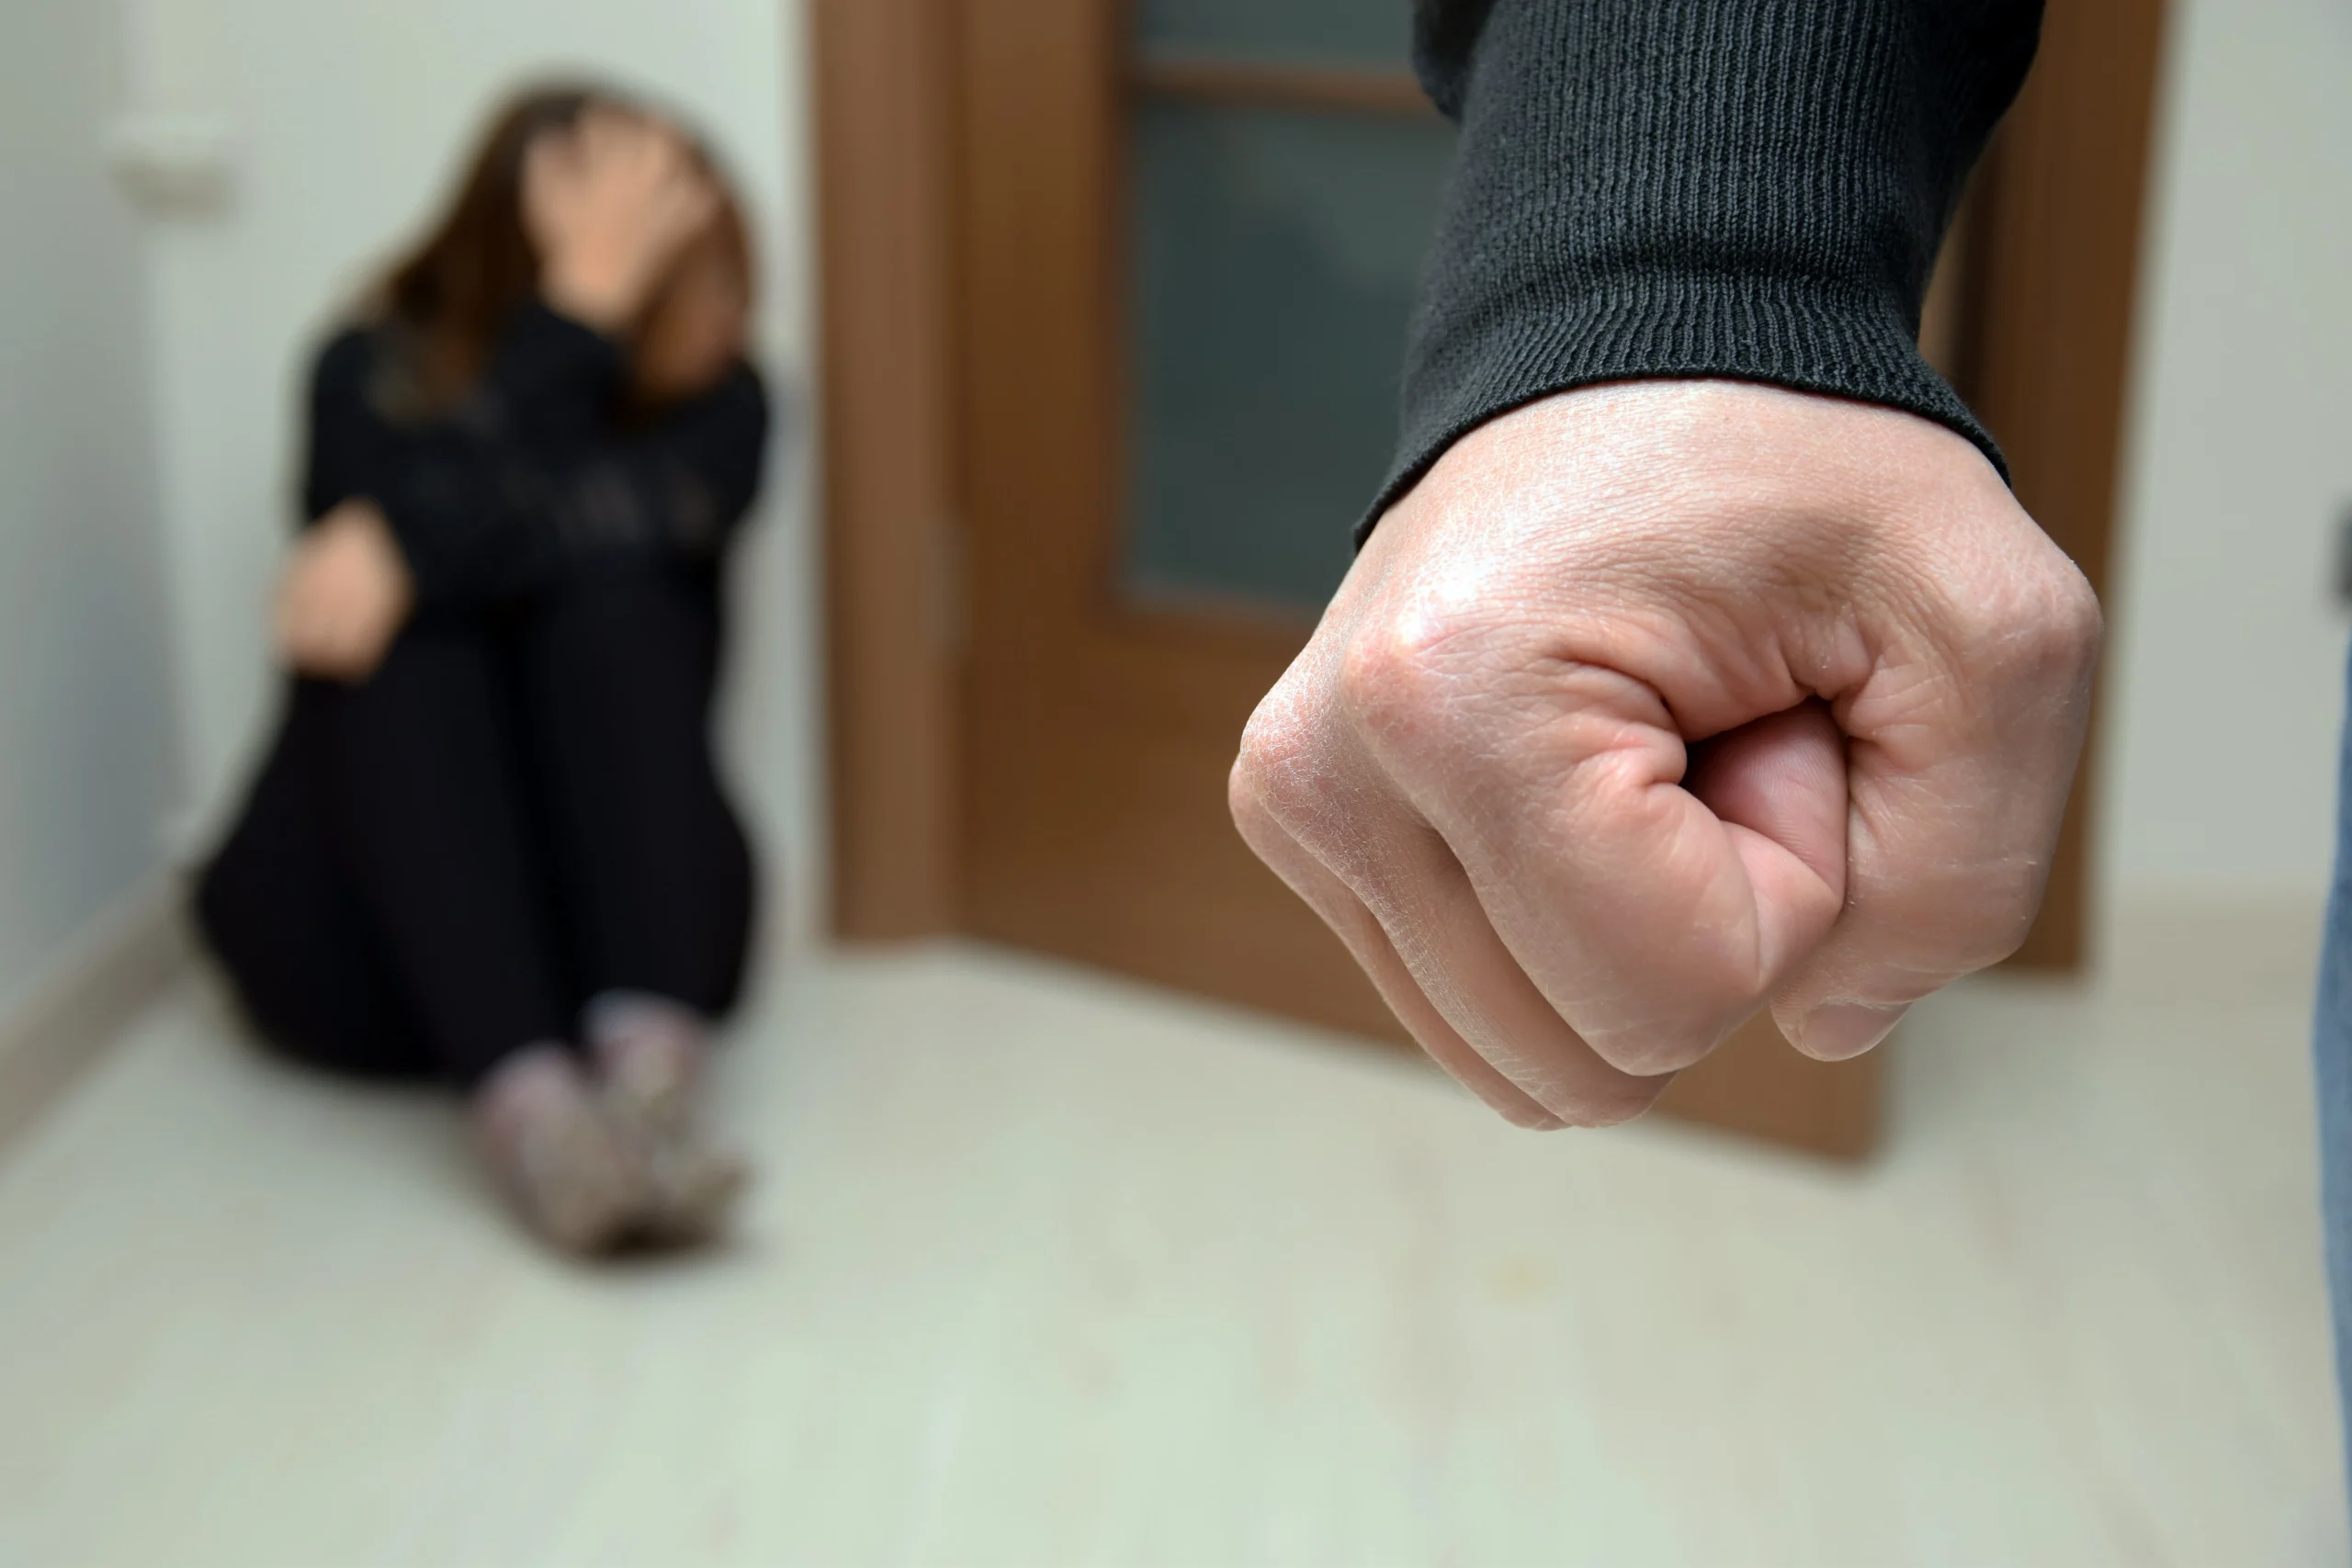 Woman curls in fear before man with fist. If you are facing allegations of domestic abuse, it is important to get in contact with a domestic violence attorney.